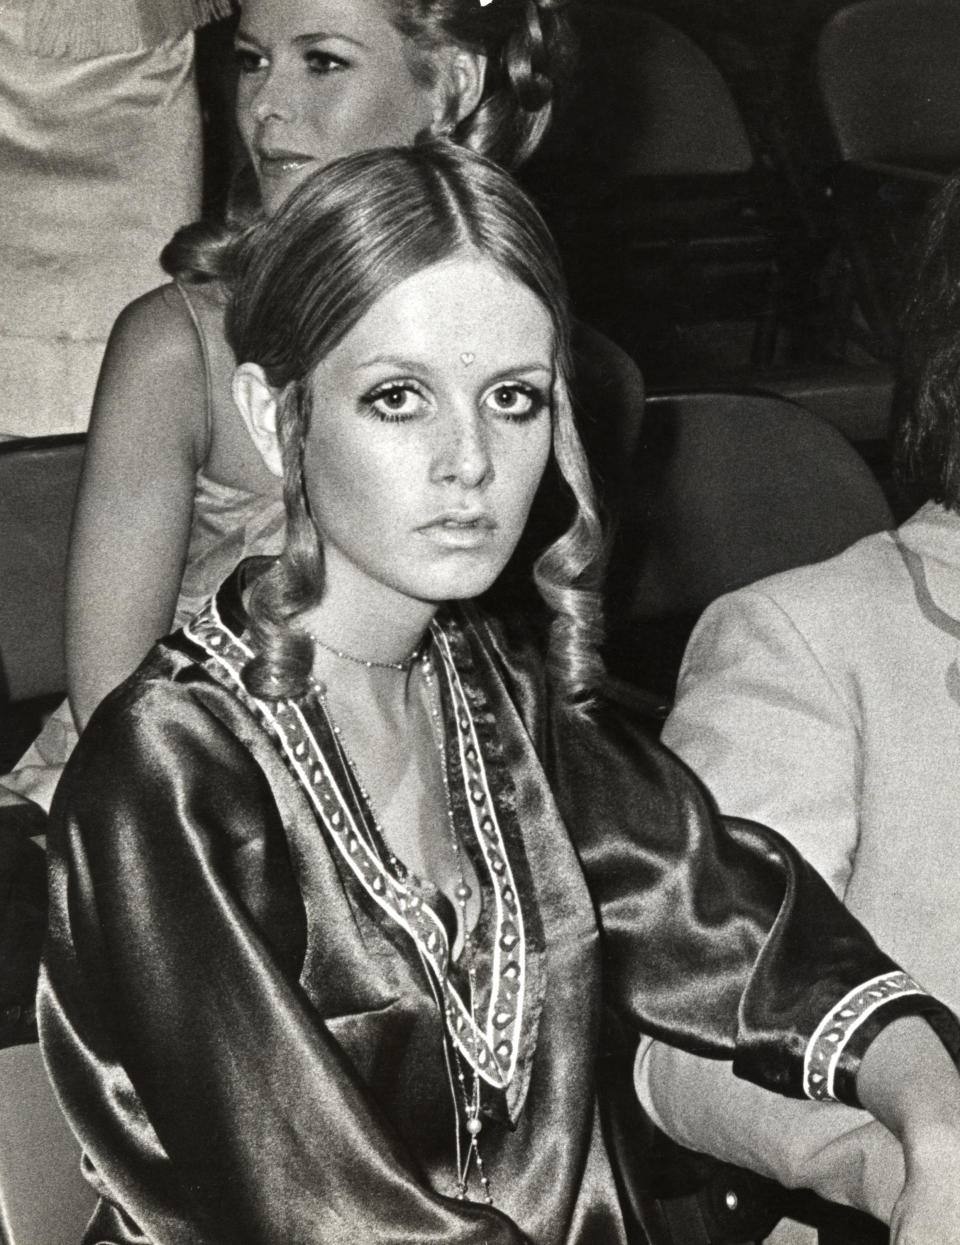 Twiggy attends the CBS "Model of the Year" Pageant at CBS Studios in New York City.